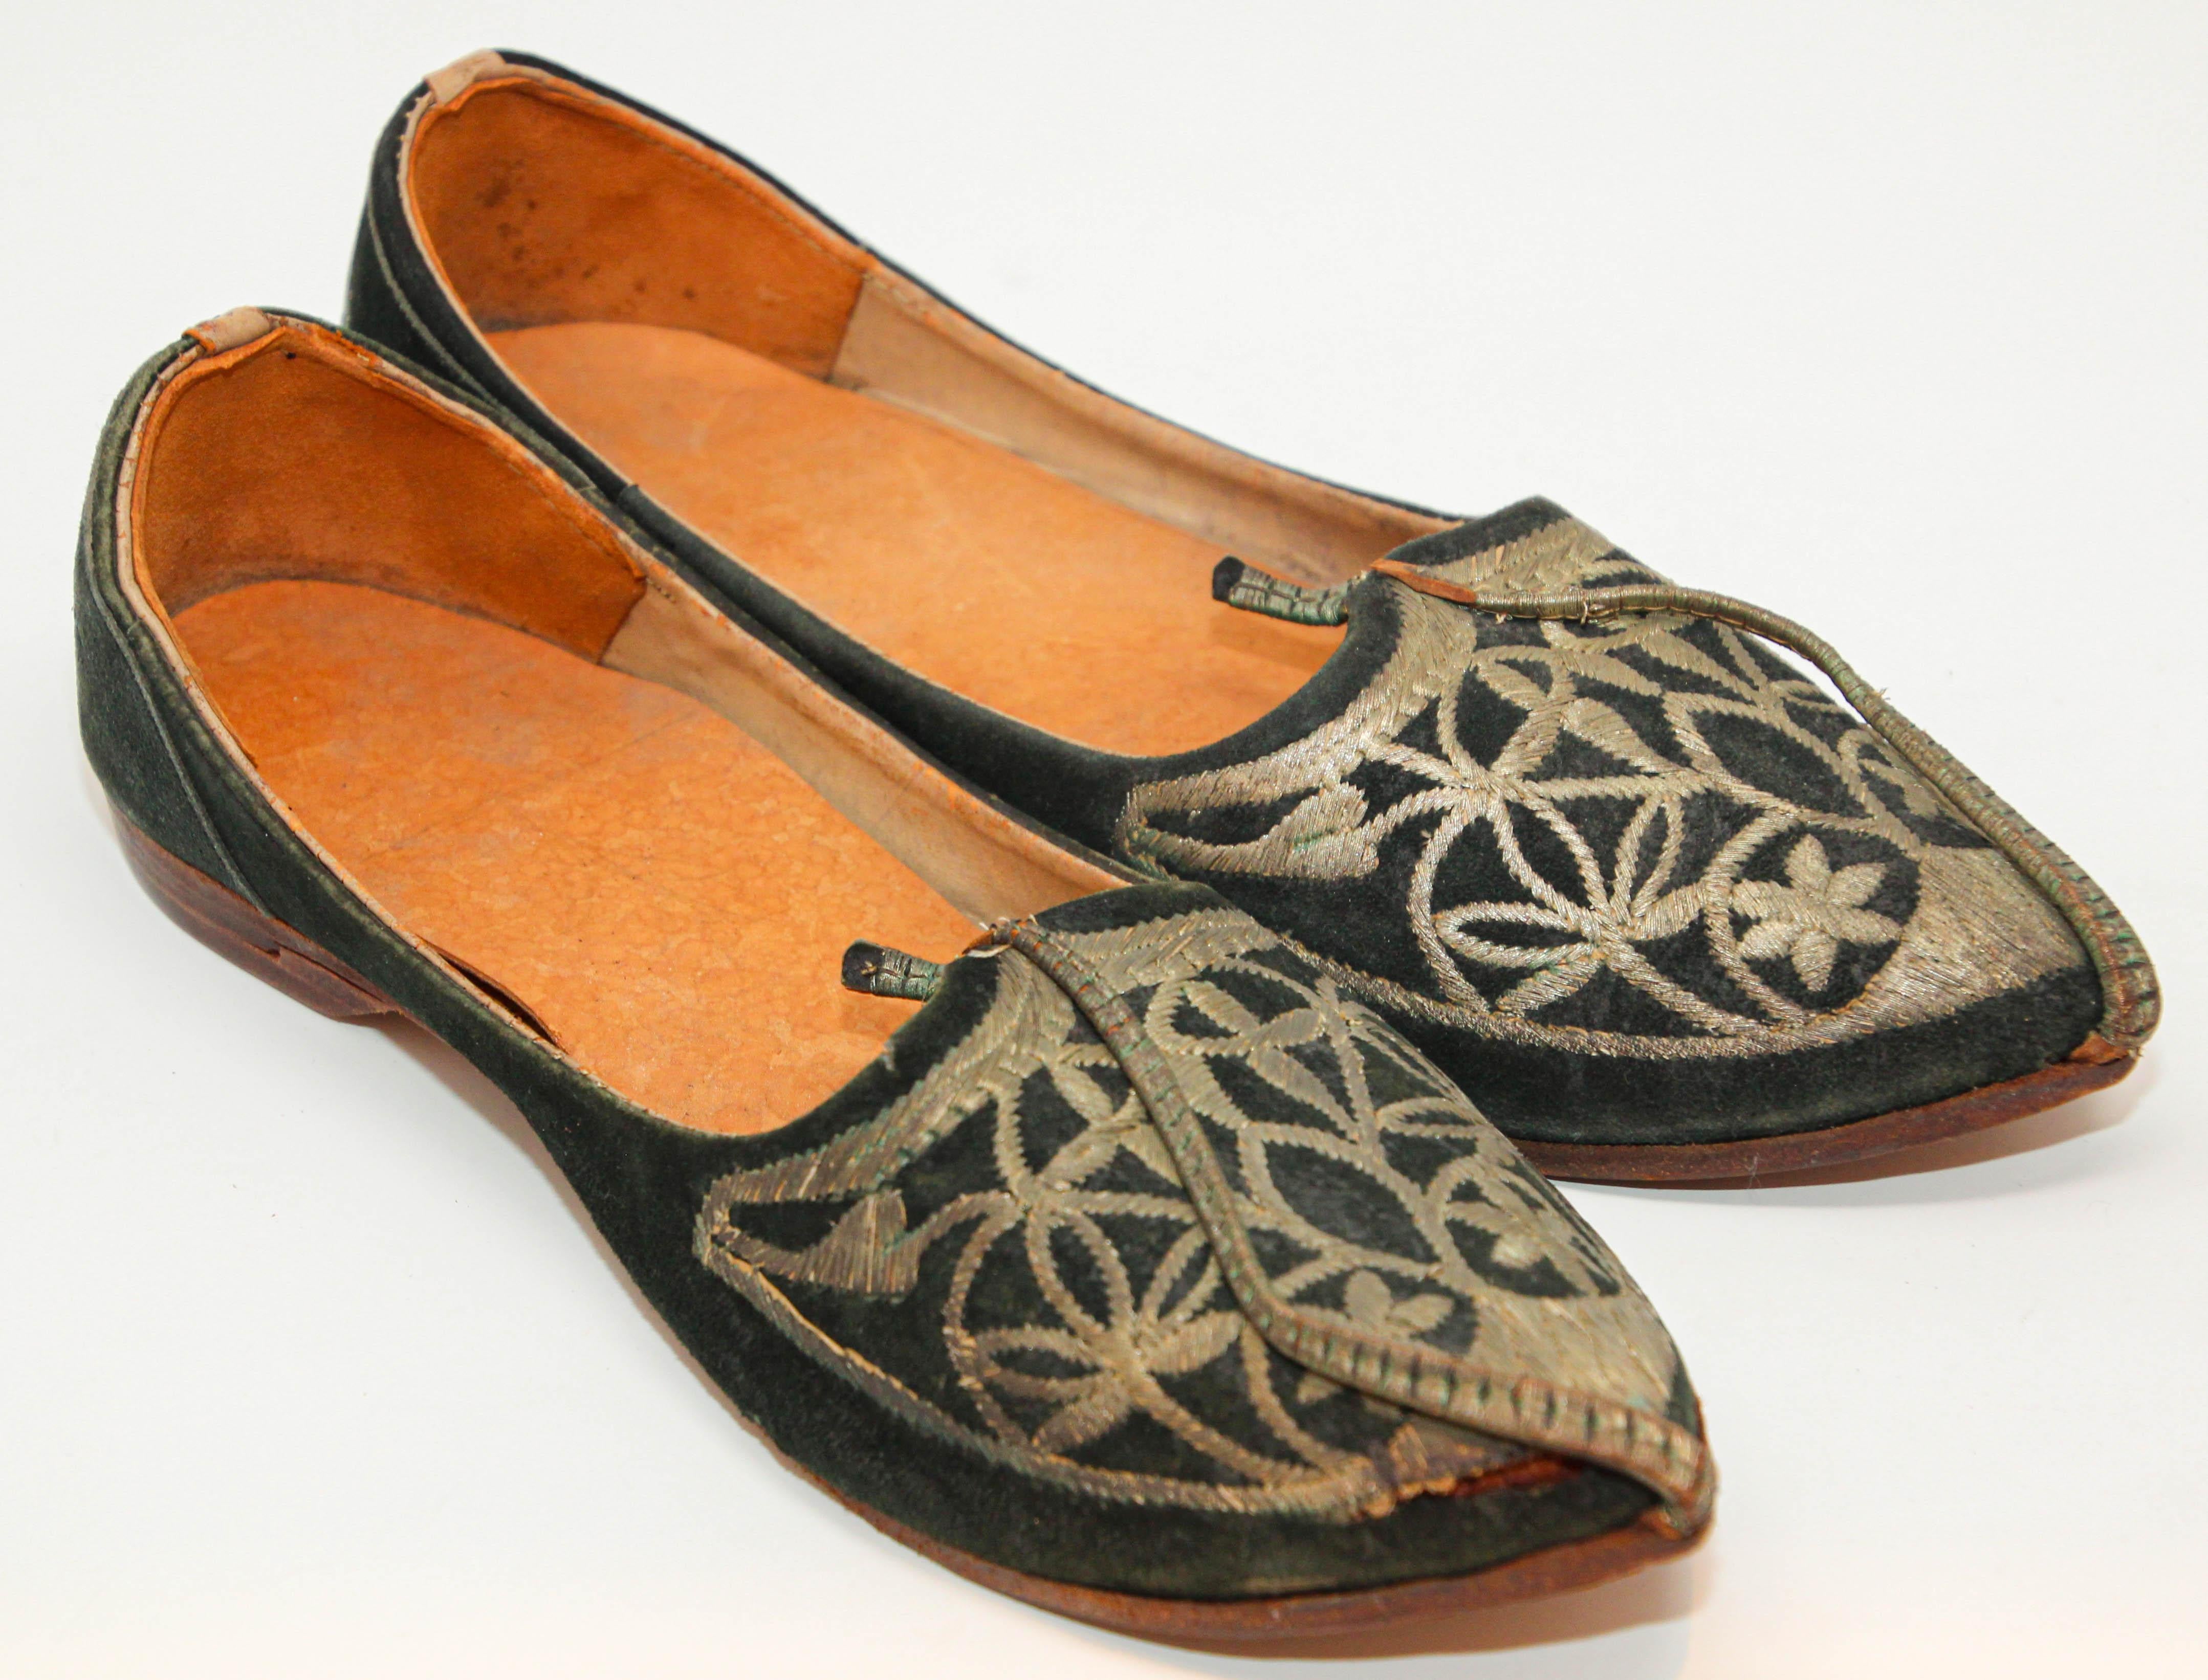 Vintage Collectible Moorish Mughal style Curled Toe Black Leather Shoes from Tony Duquette Estate.
Hand made with leather body, the fronts elaborately decorated in hand-stitched metal bullion. Tapered returned leather front projection in “genie”